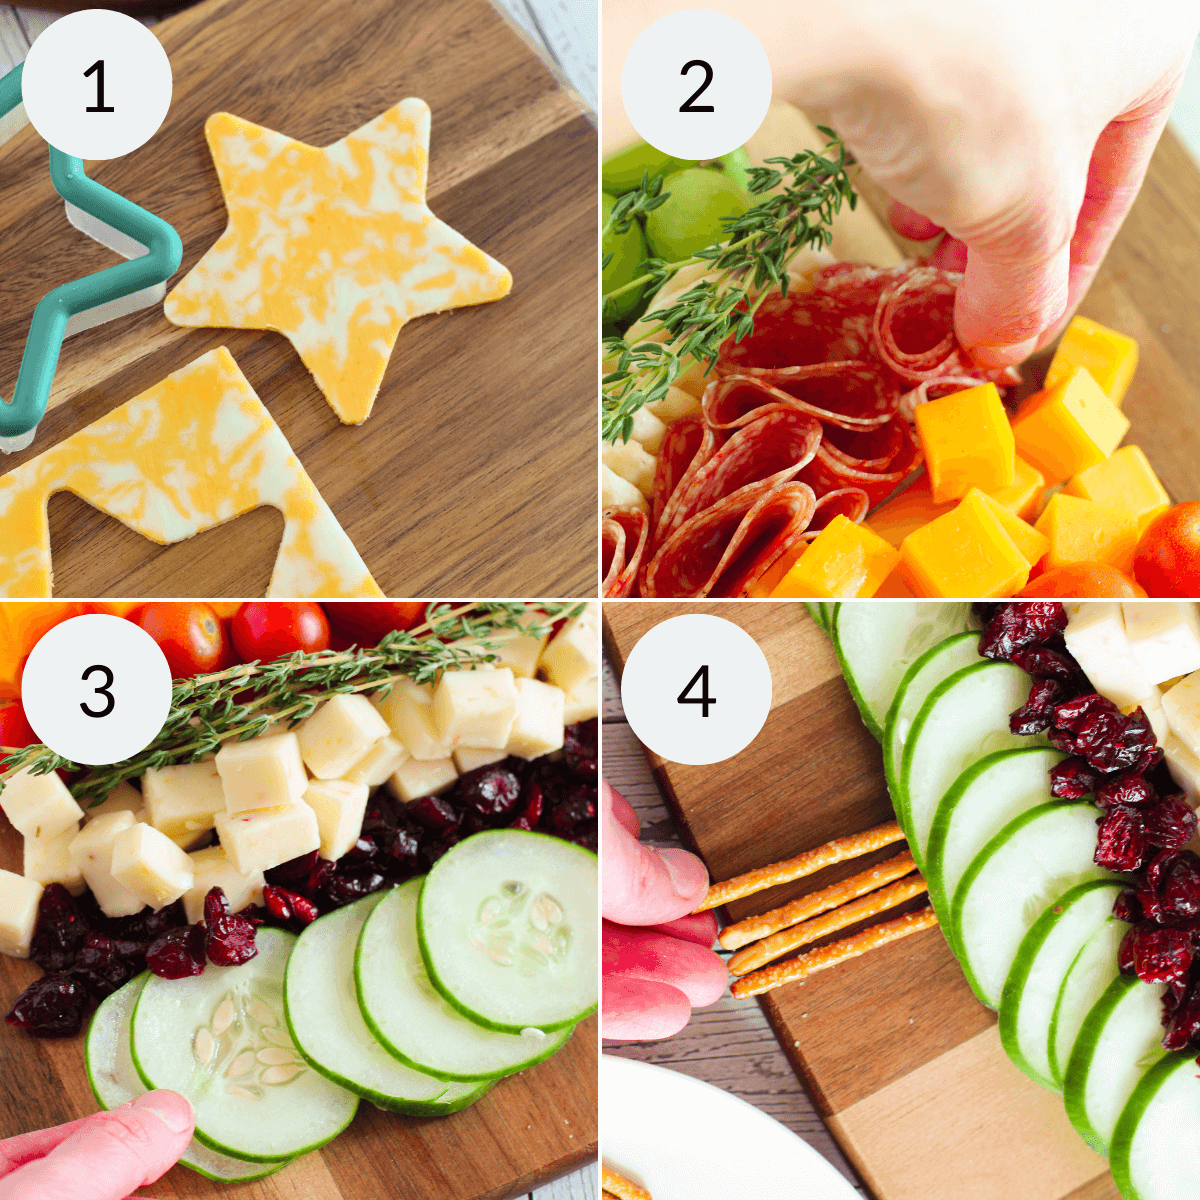 Building the tree by layering the christmas tree charcuterie board.